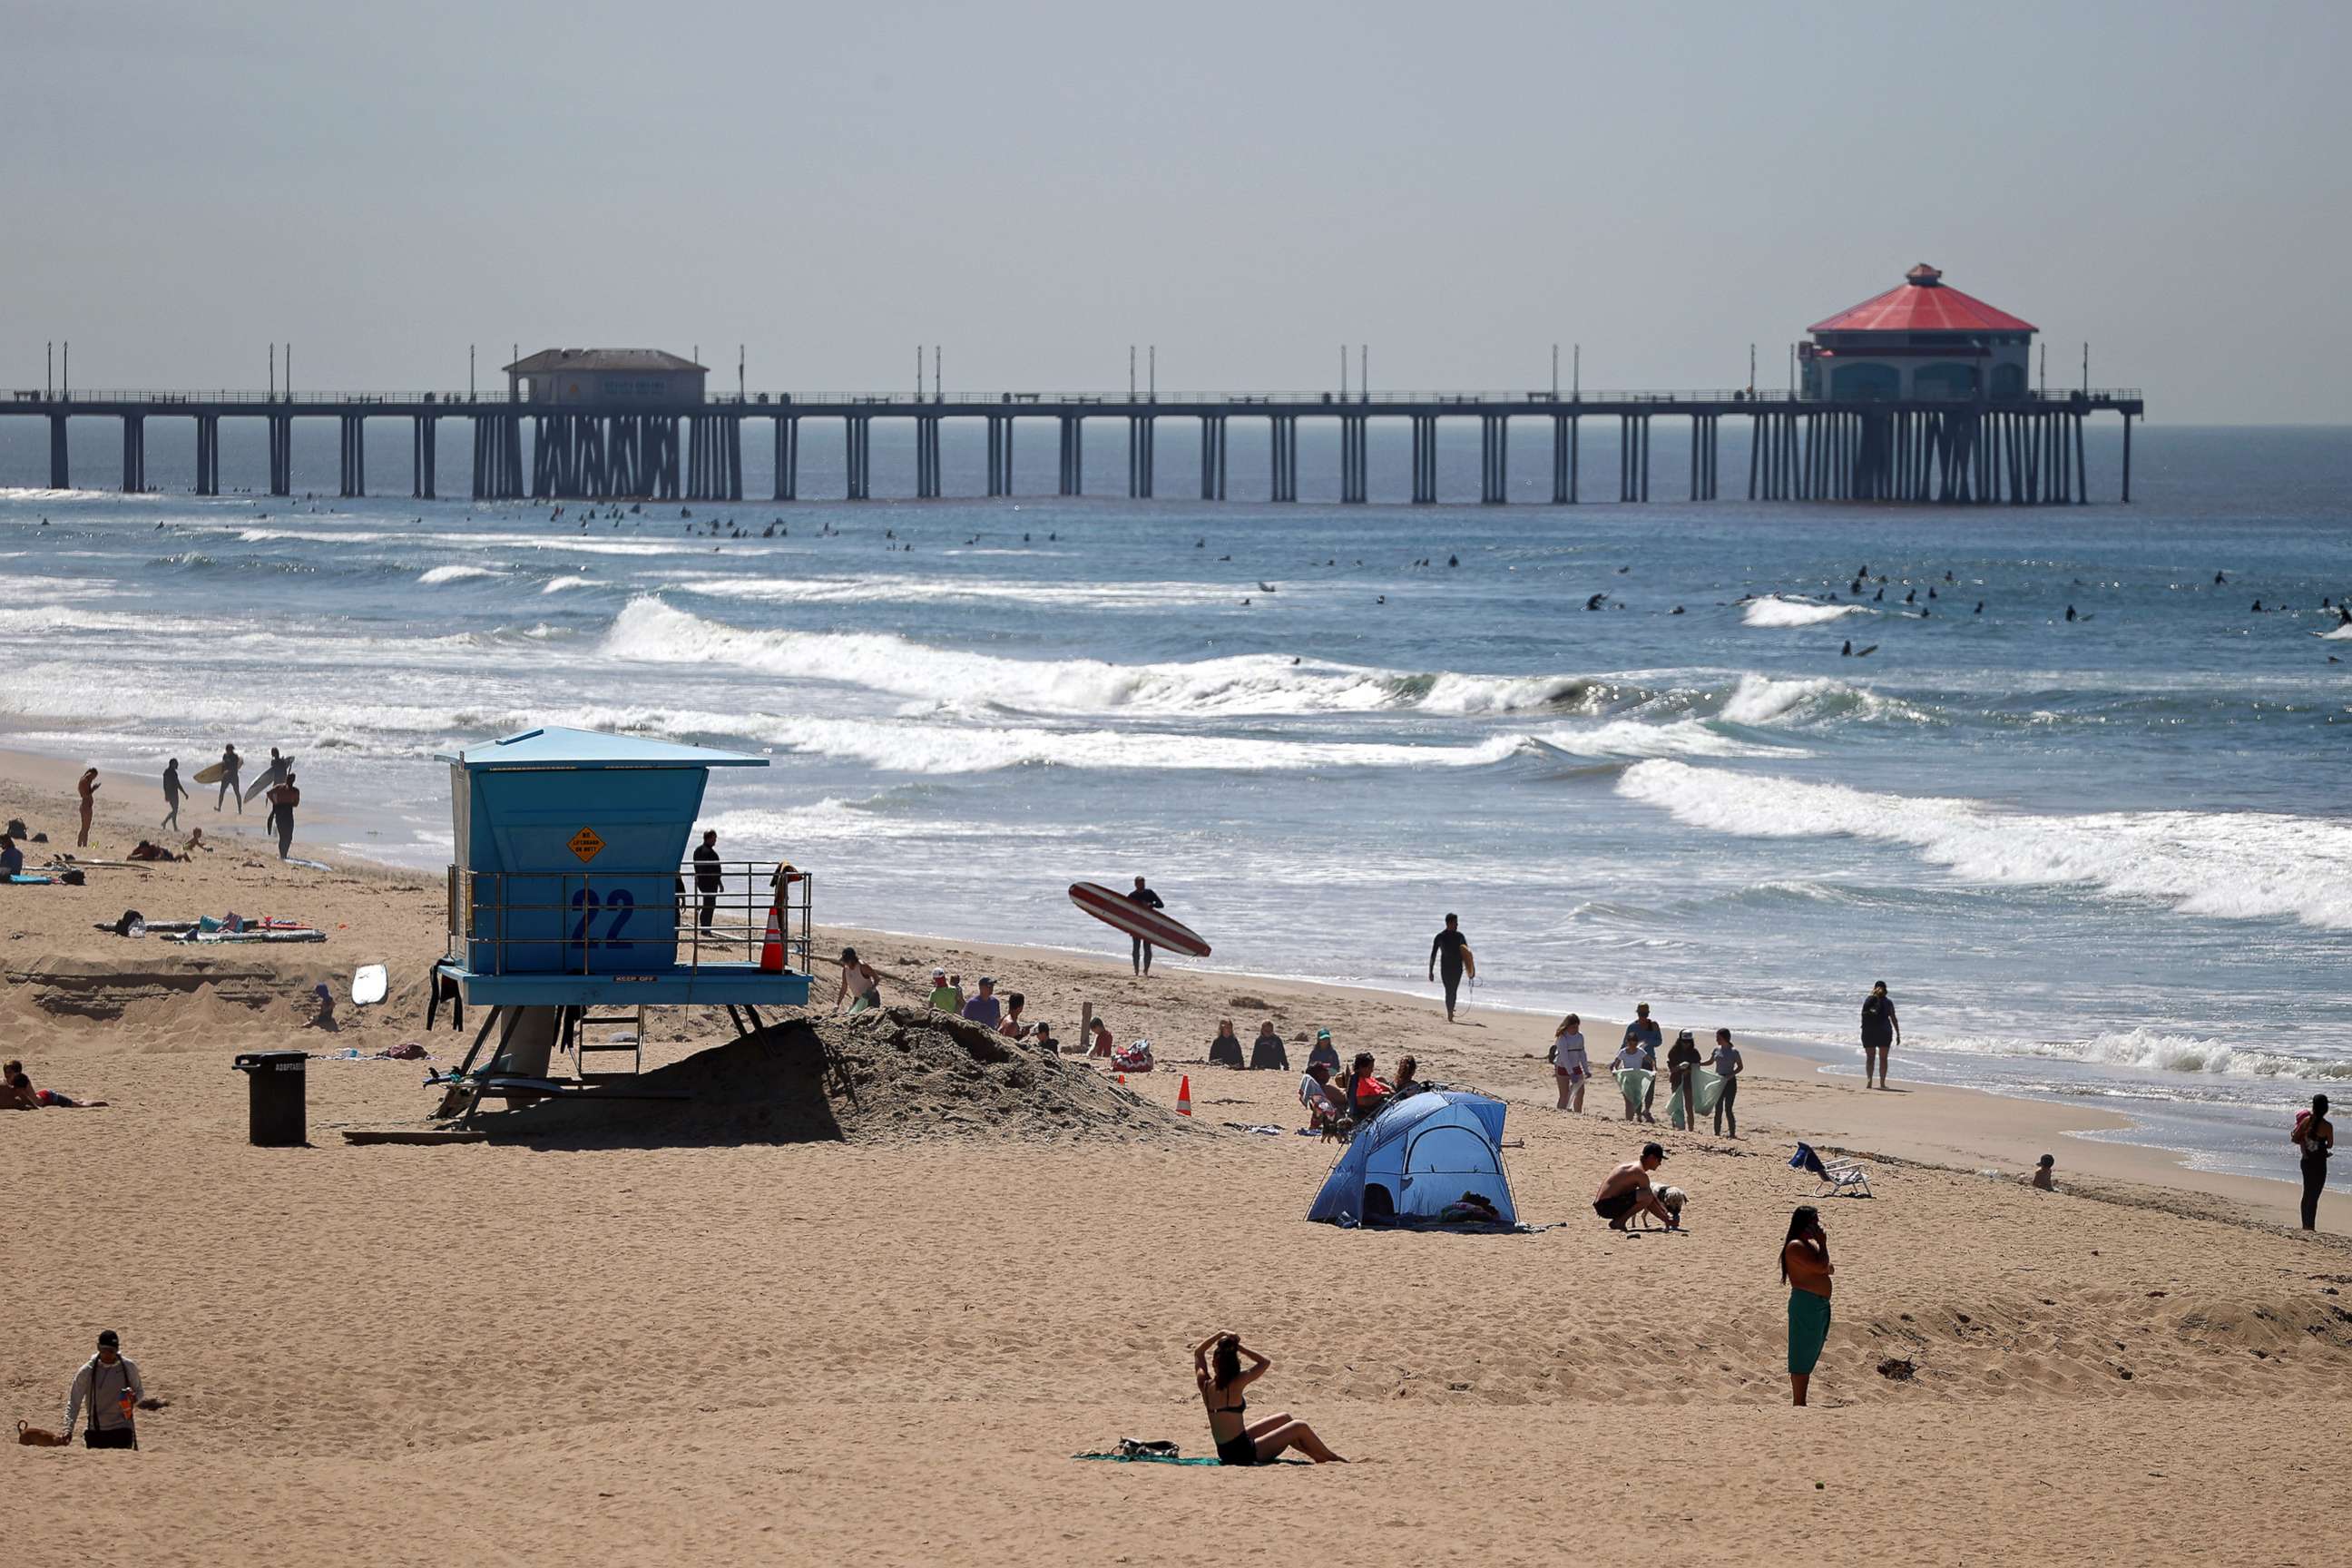 PHOTO: Beachgoers and surfers are seen at Huntington Beach, on April 22, 2020 in California. Southern California is expecting summer like weather over the next week as social distancing and beach closures continue due to the coronavirus (COVID-19). 